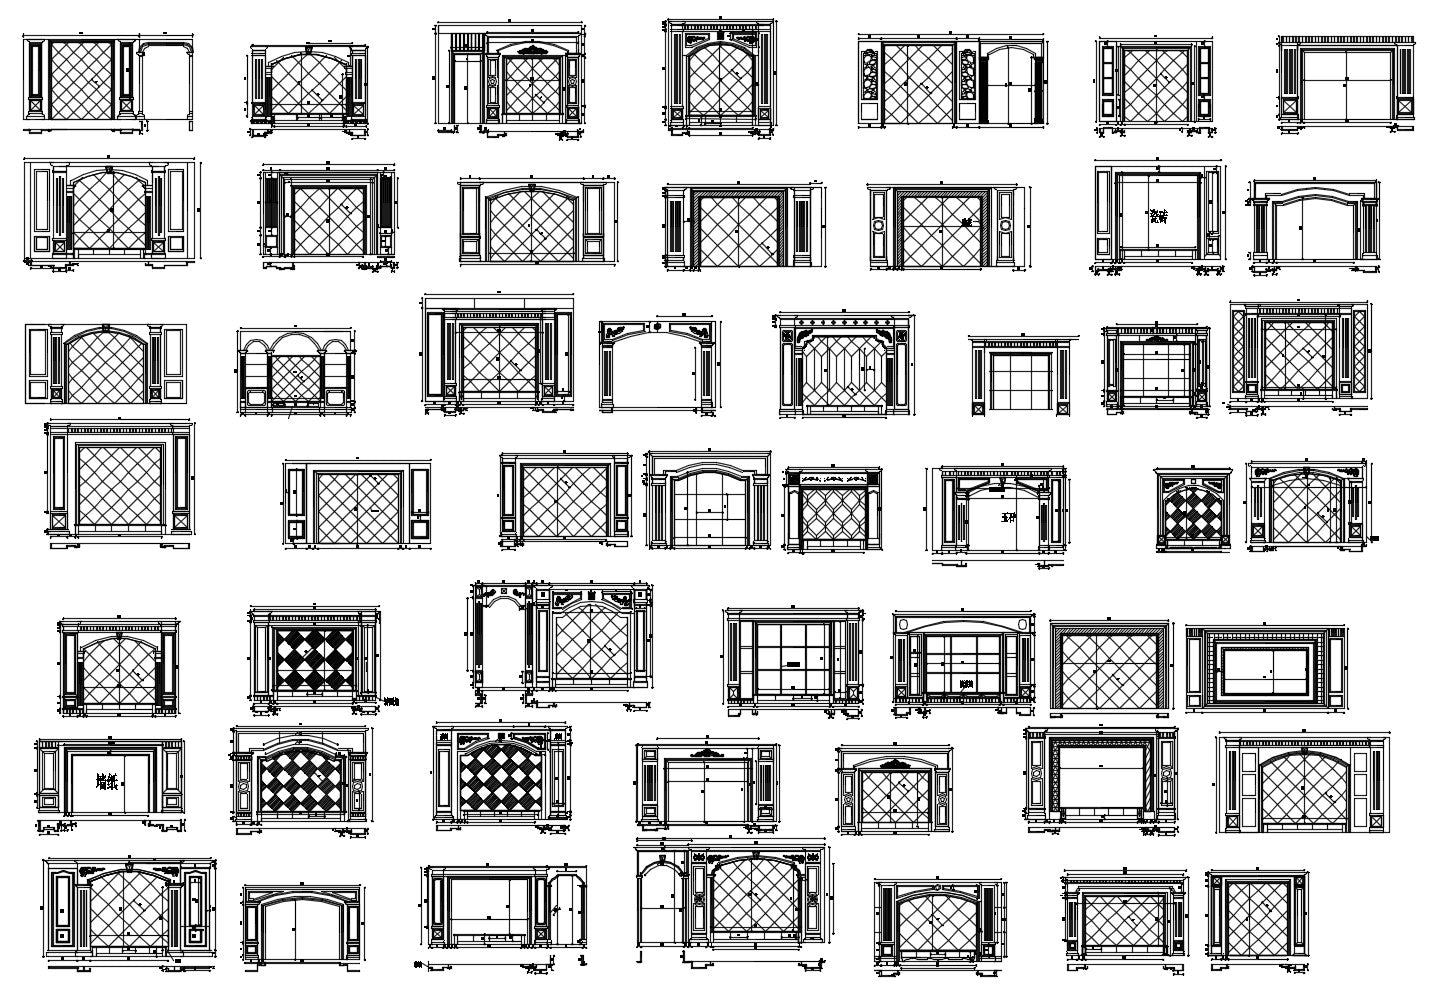 188 Types of TV Wall Design CAD Drawings-Living Room,Bedroom Design